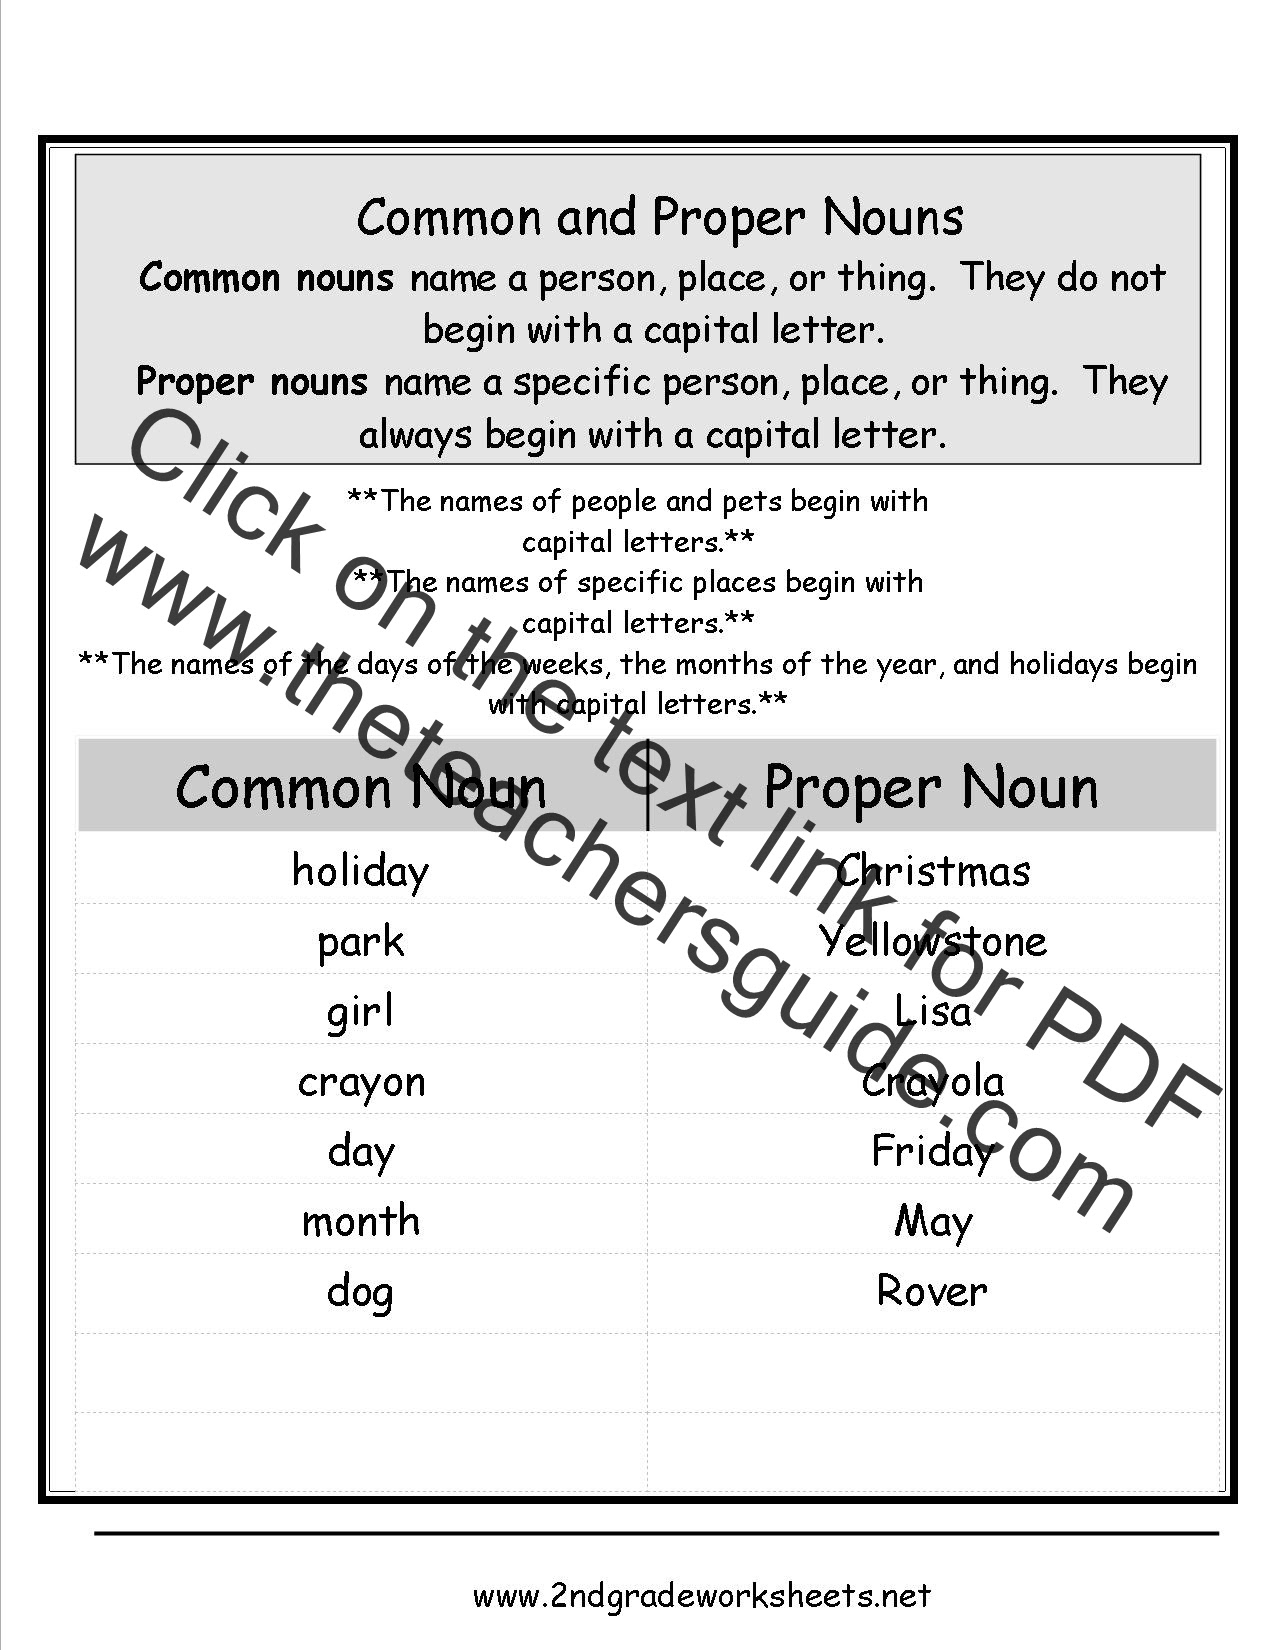 common-and-proper-noun-worksheet-for-class-3-3rd-grade-propers-worksheet-abstract-printable